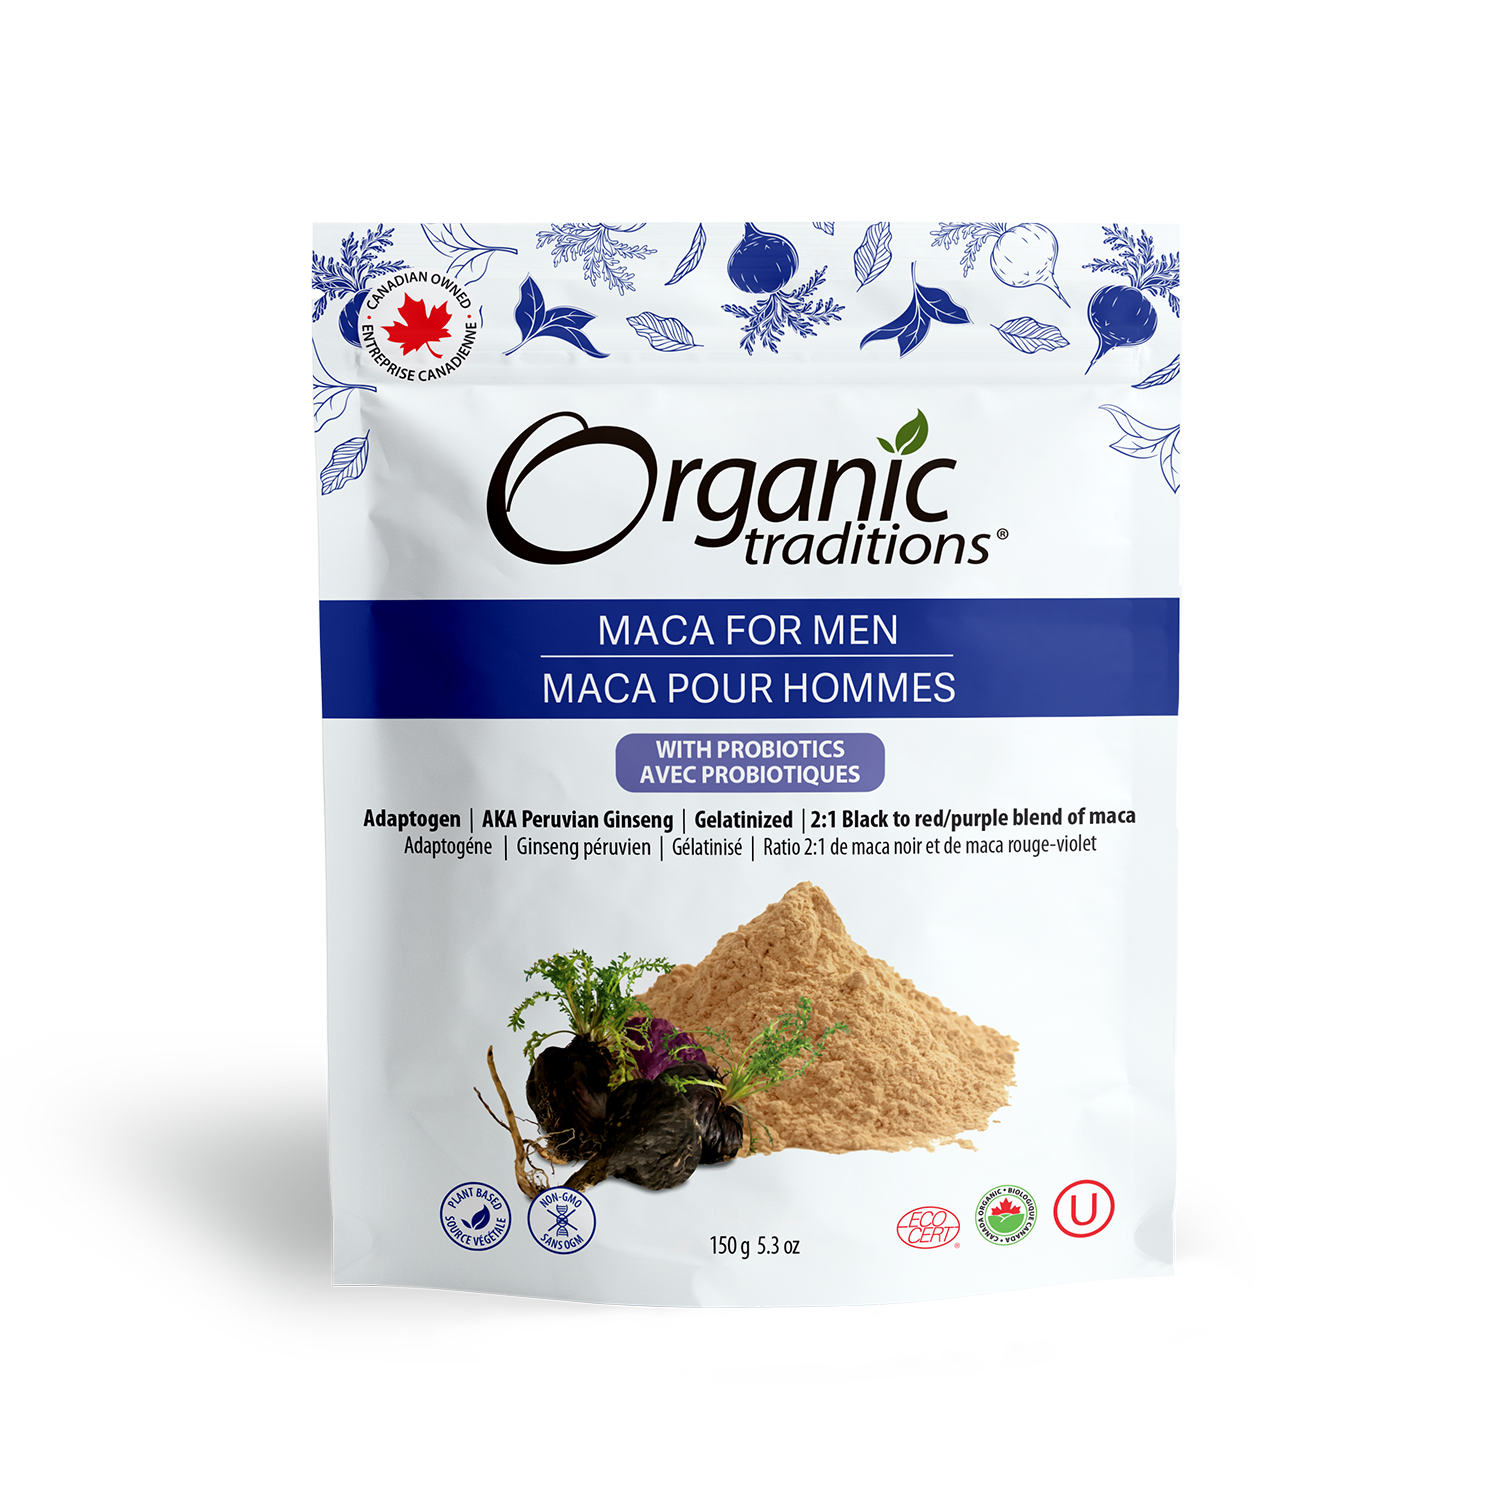 organic traditions maca for men with probiotics front of bag image